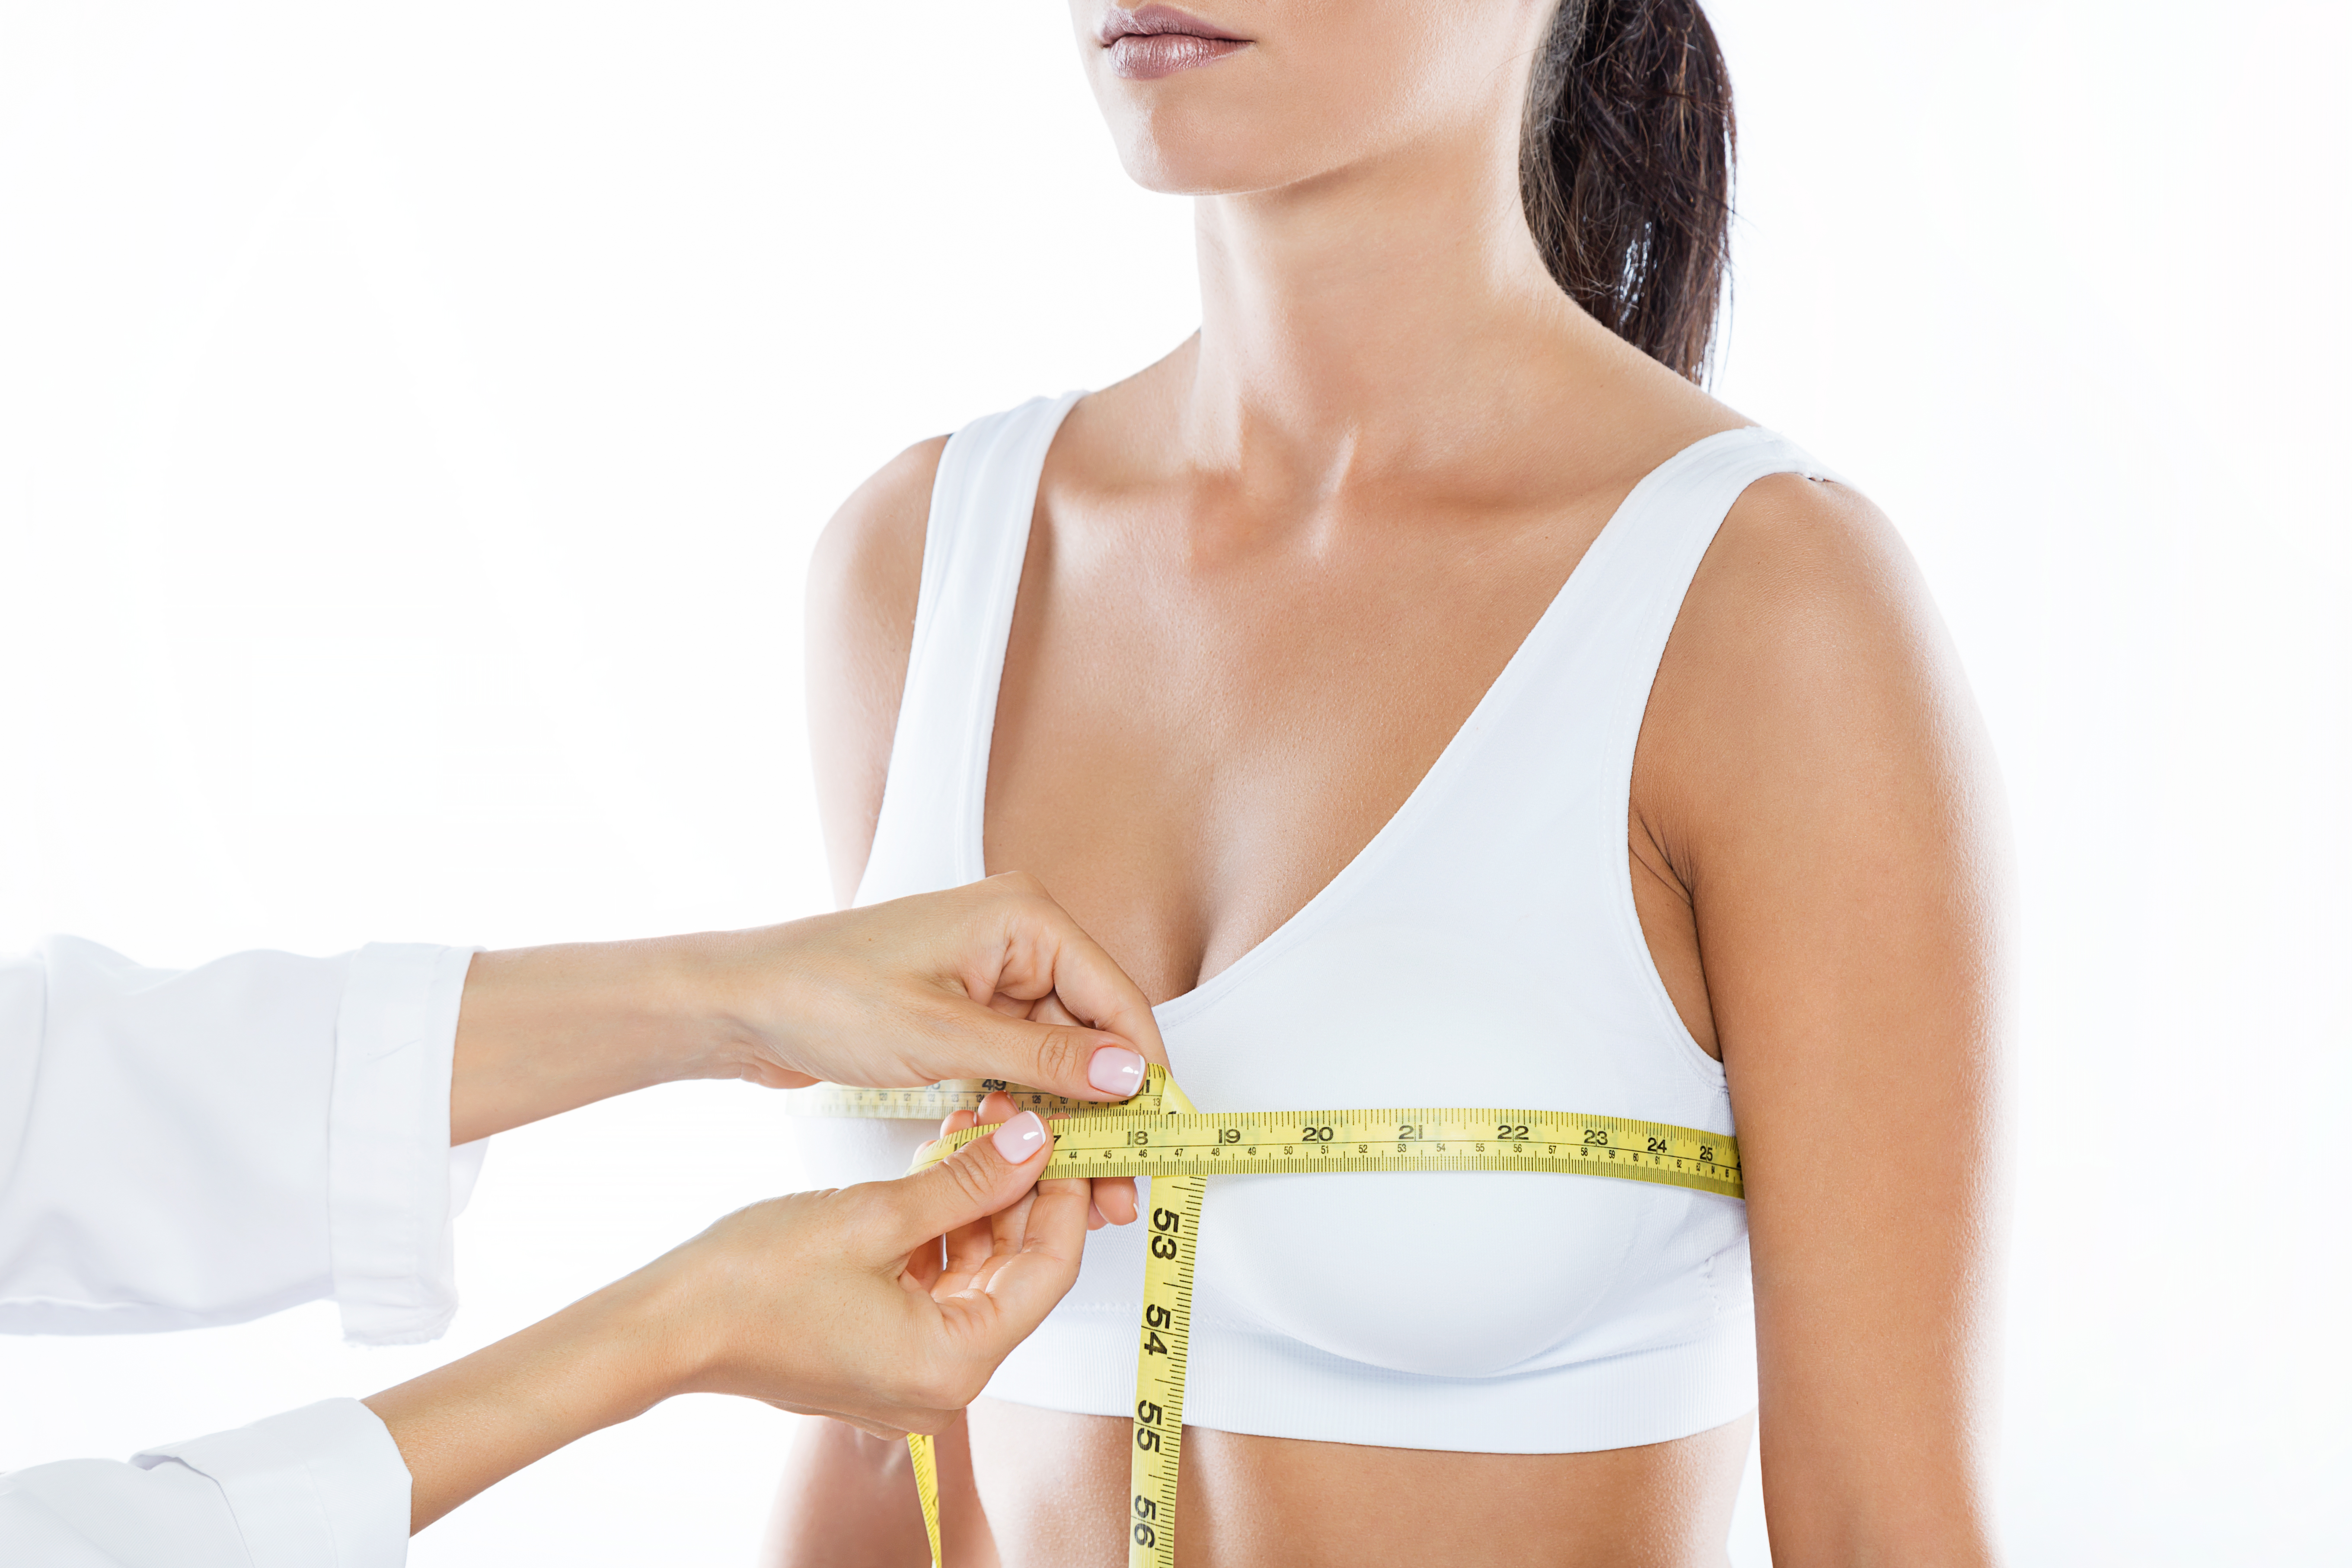 Diet and exercise to reduce breast size naturally